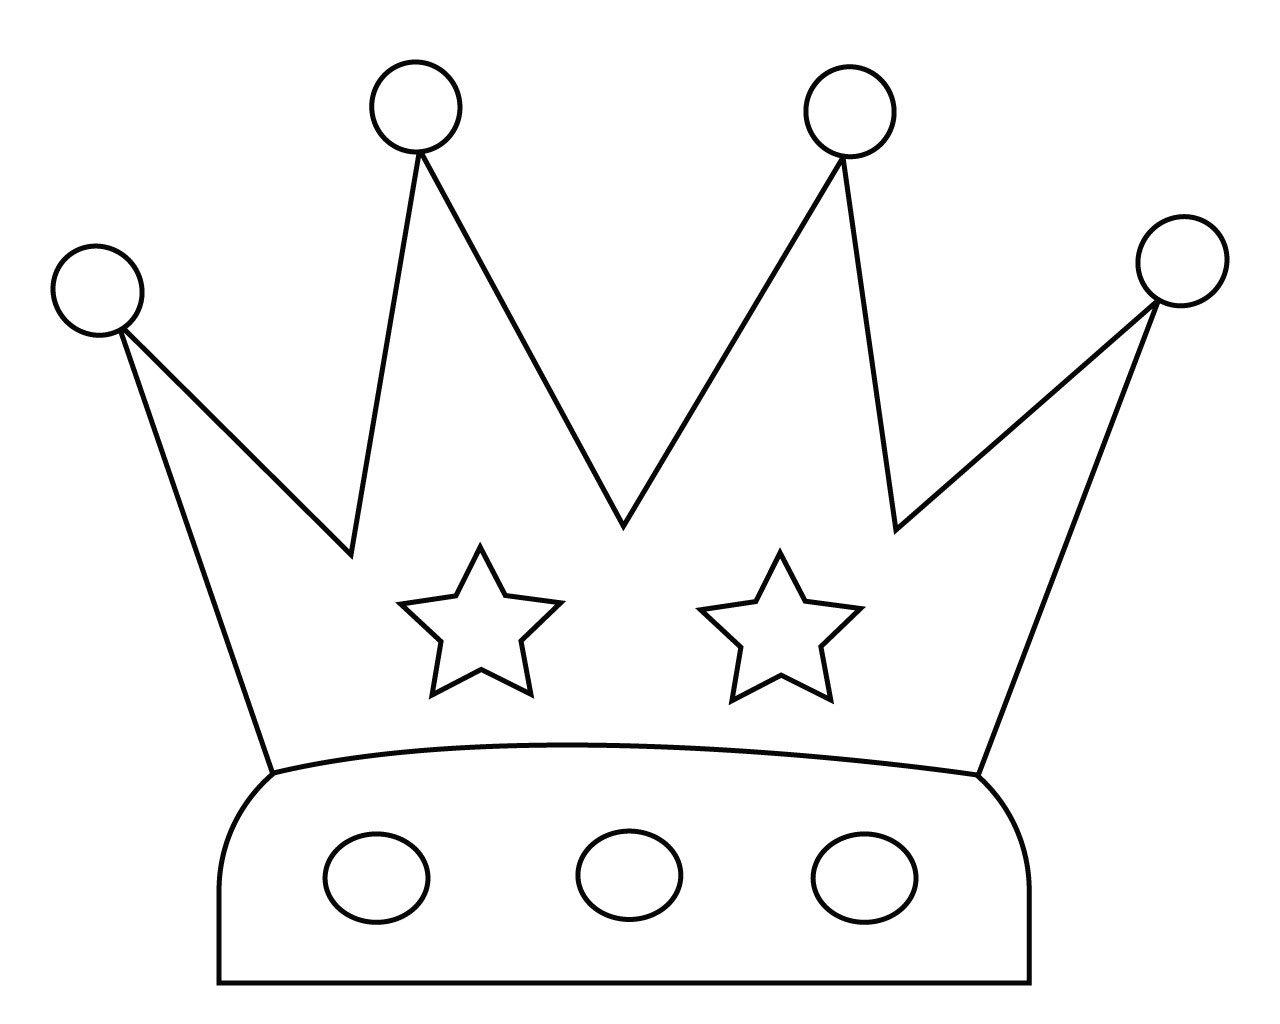 Crown Coloring Pages To Print, Simple and Easy Pictures